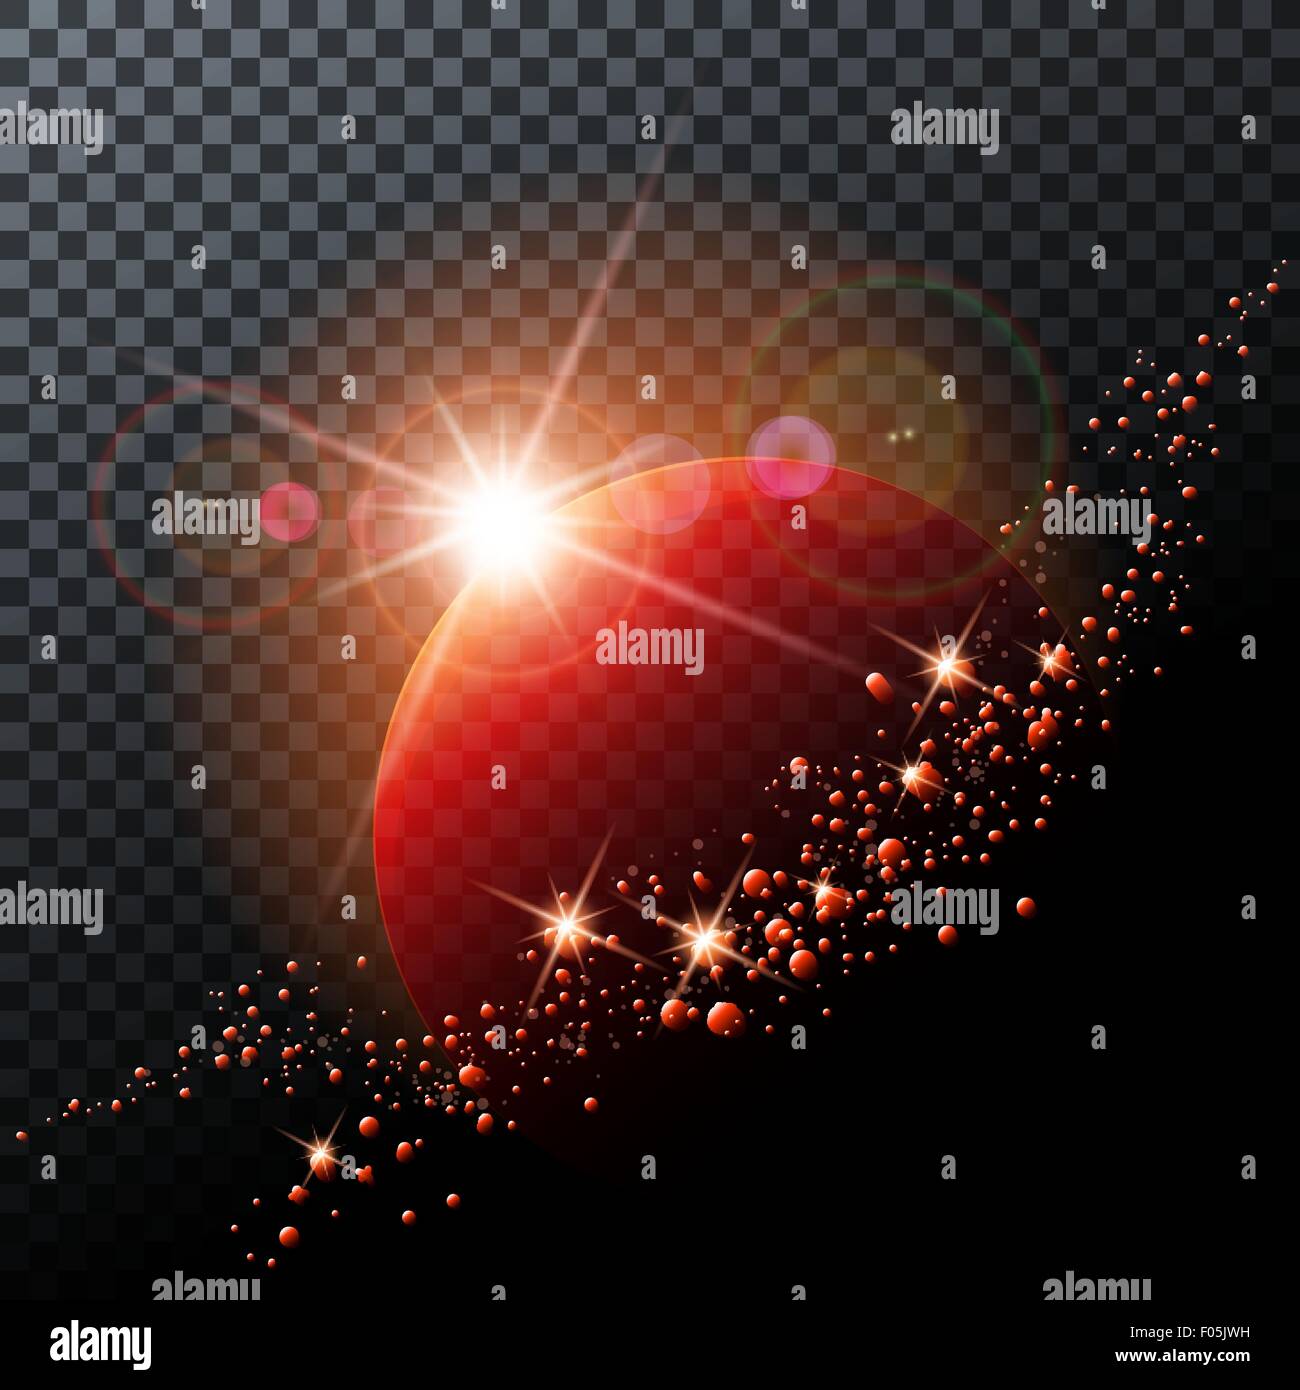 Glowing planet with asteroid belt on transparent background. Stock Vector